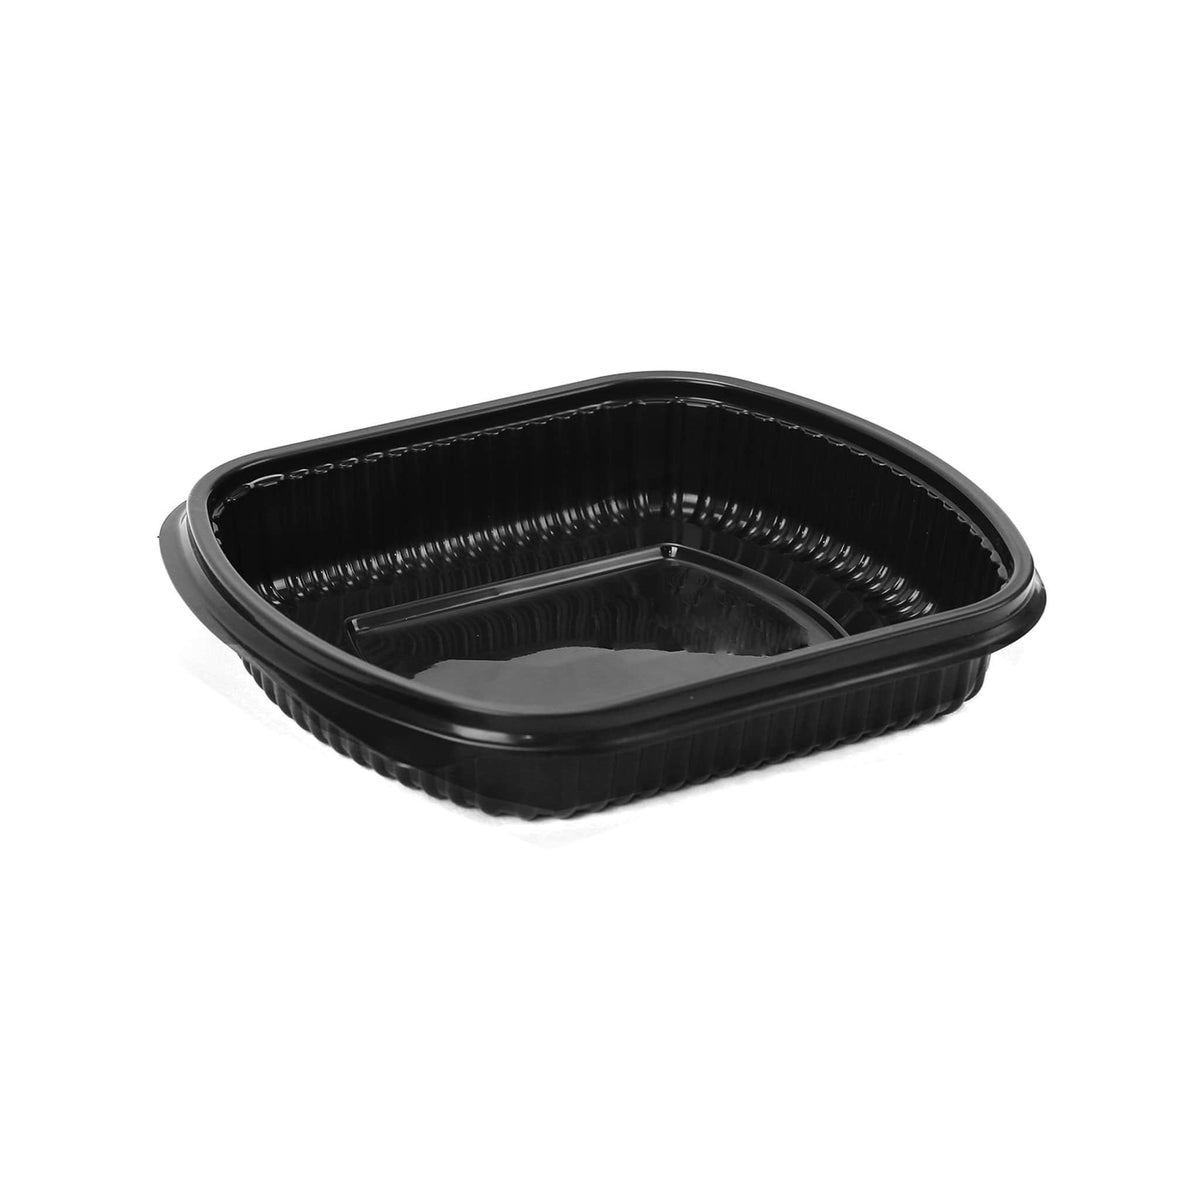 Black Base Rectangular Container With Lid